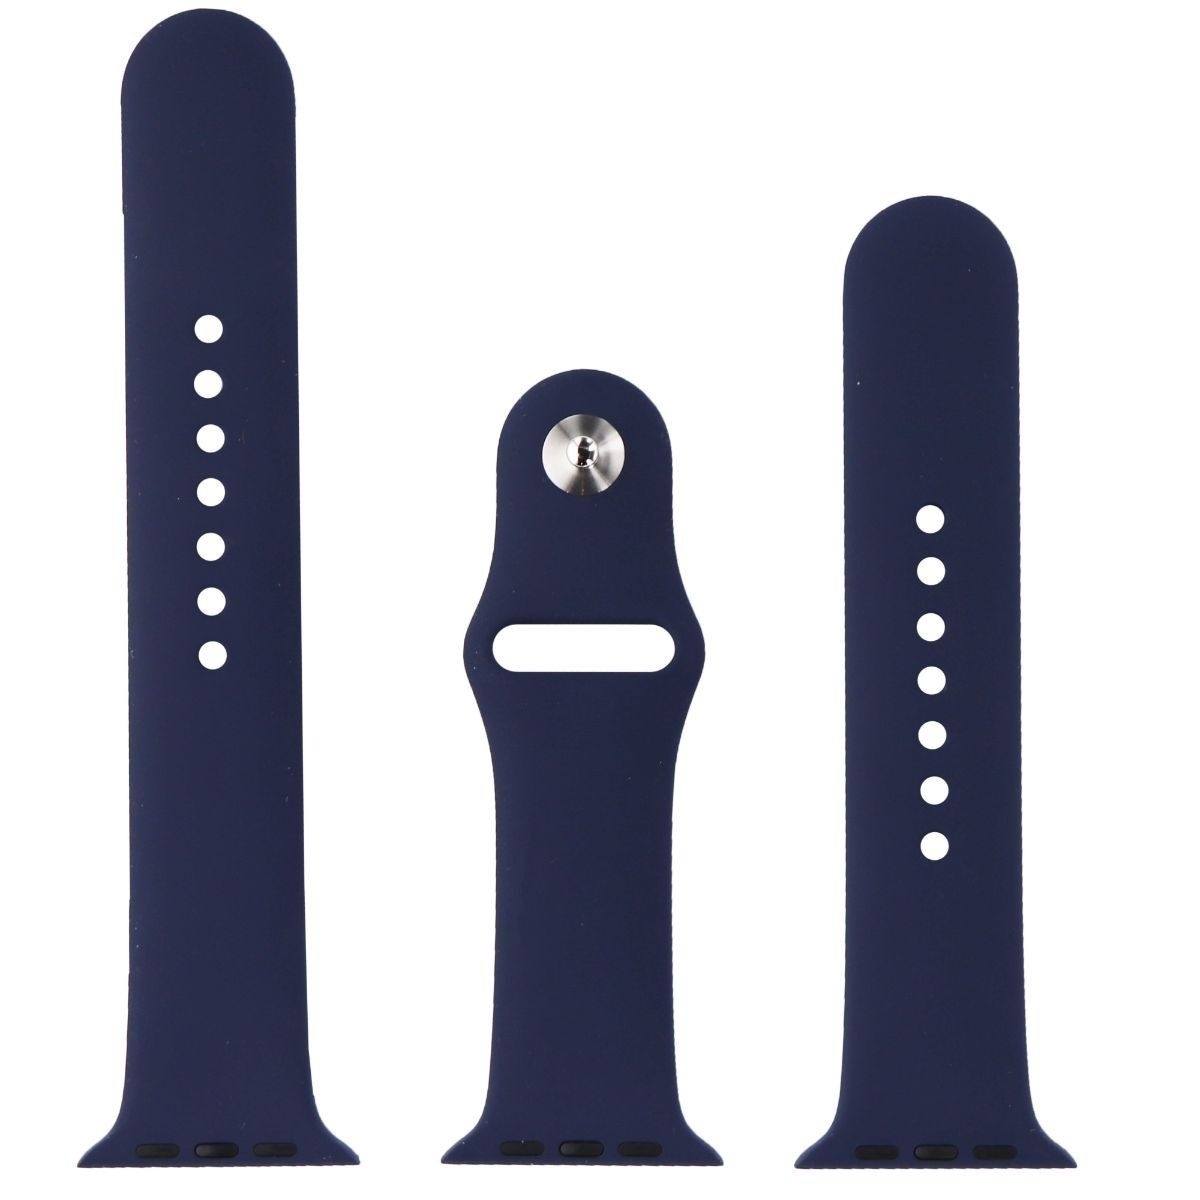 Apple 42mm Midnight Blue Sport Band For The Apple Watch - MLL02ZM/A - SM / ML (Refurbished)